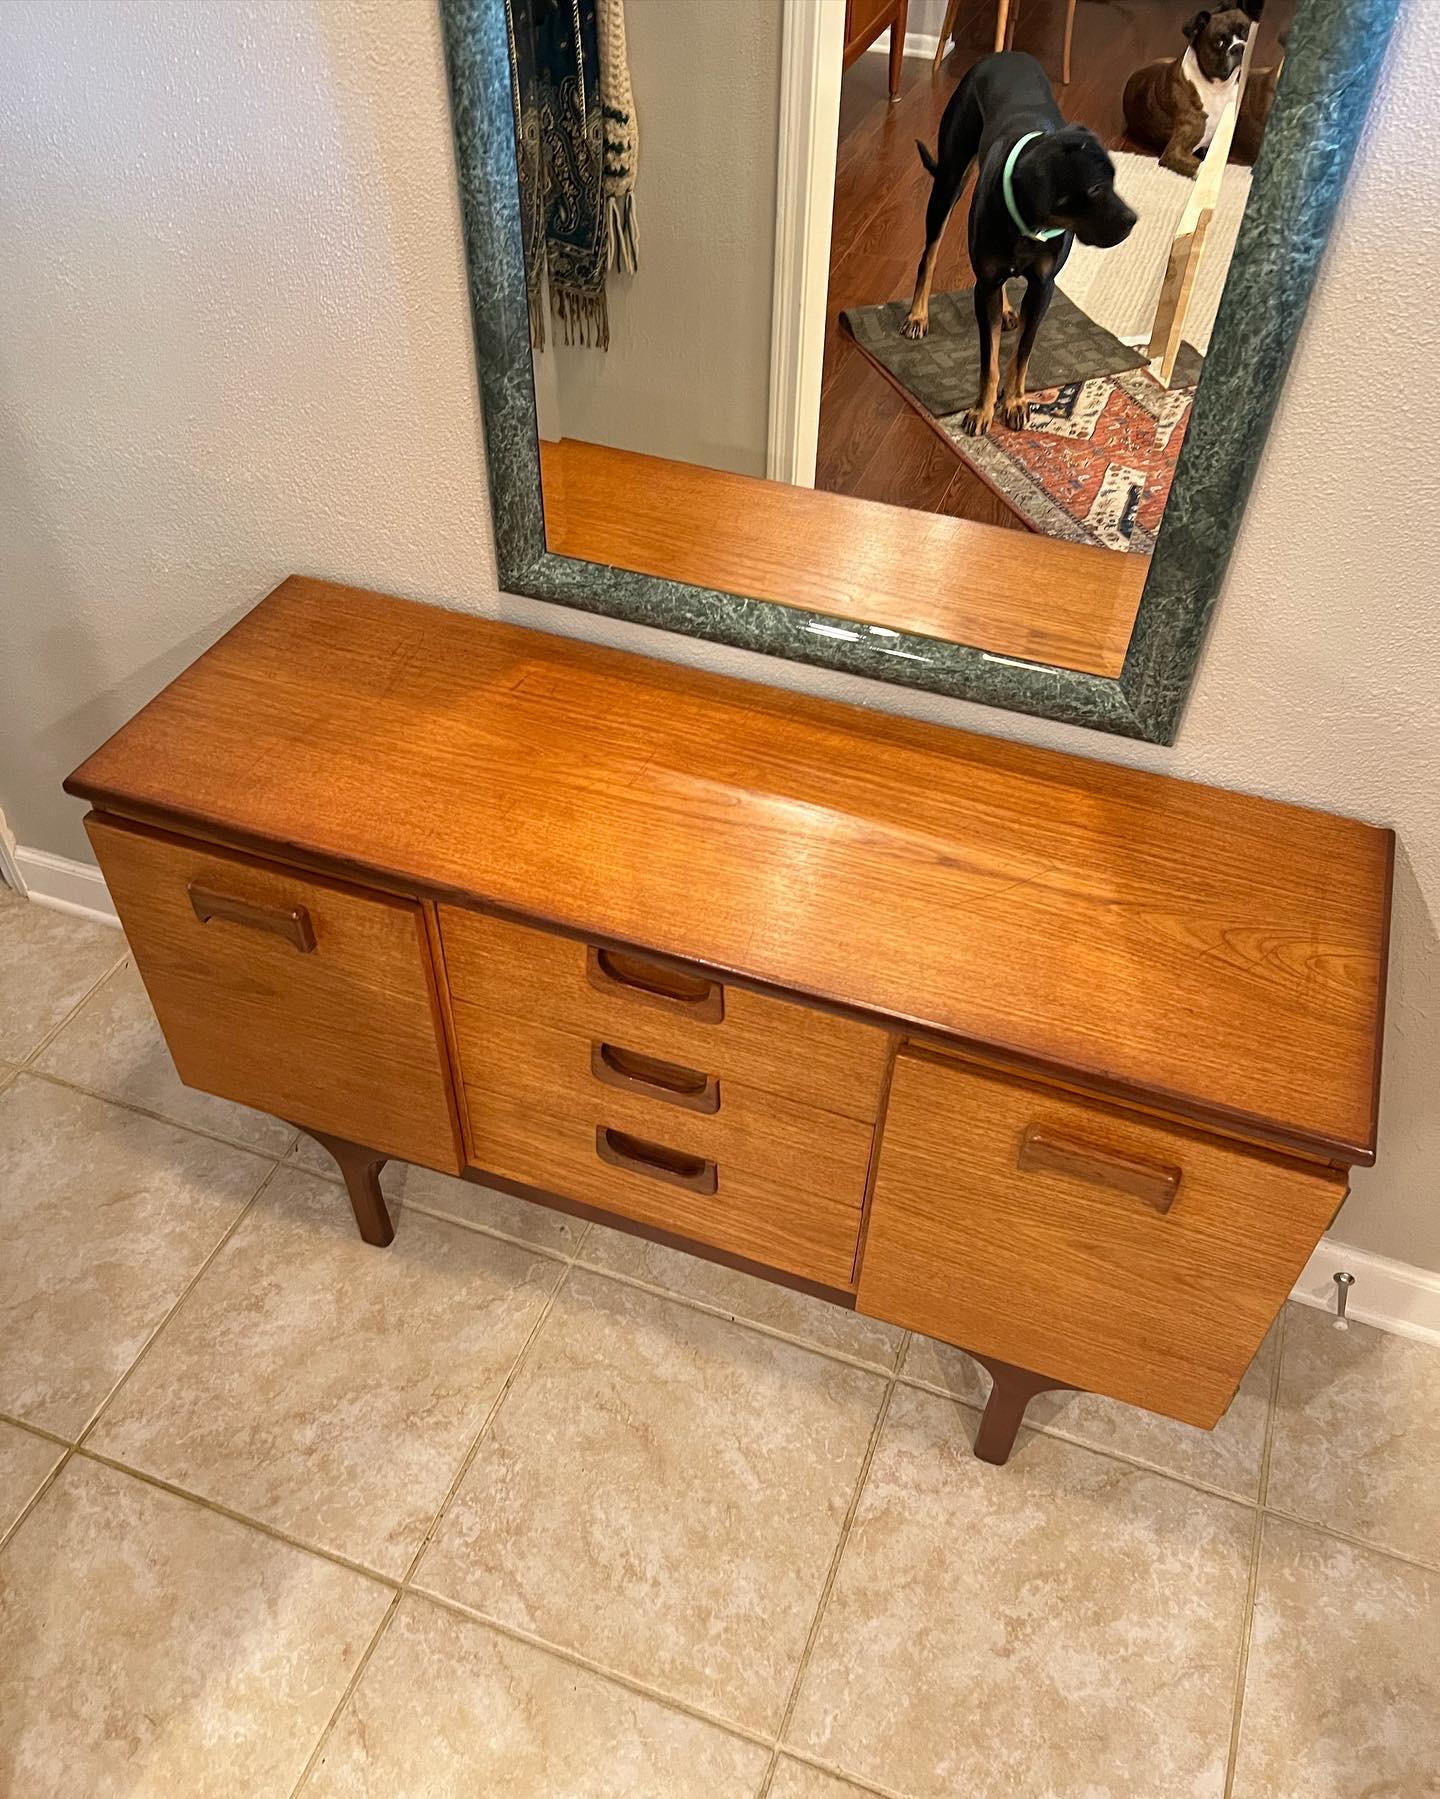 Small Mid-Century Modern teak sideboard by G-Plan, from the 1960s. This is the most petite sideboard I’ve had and I’m absolutely obsessed. Currently using it as a console table, but I can also see it being used in a small living space or dining